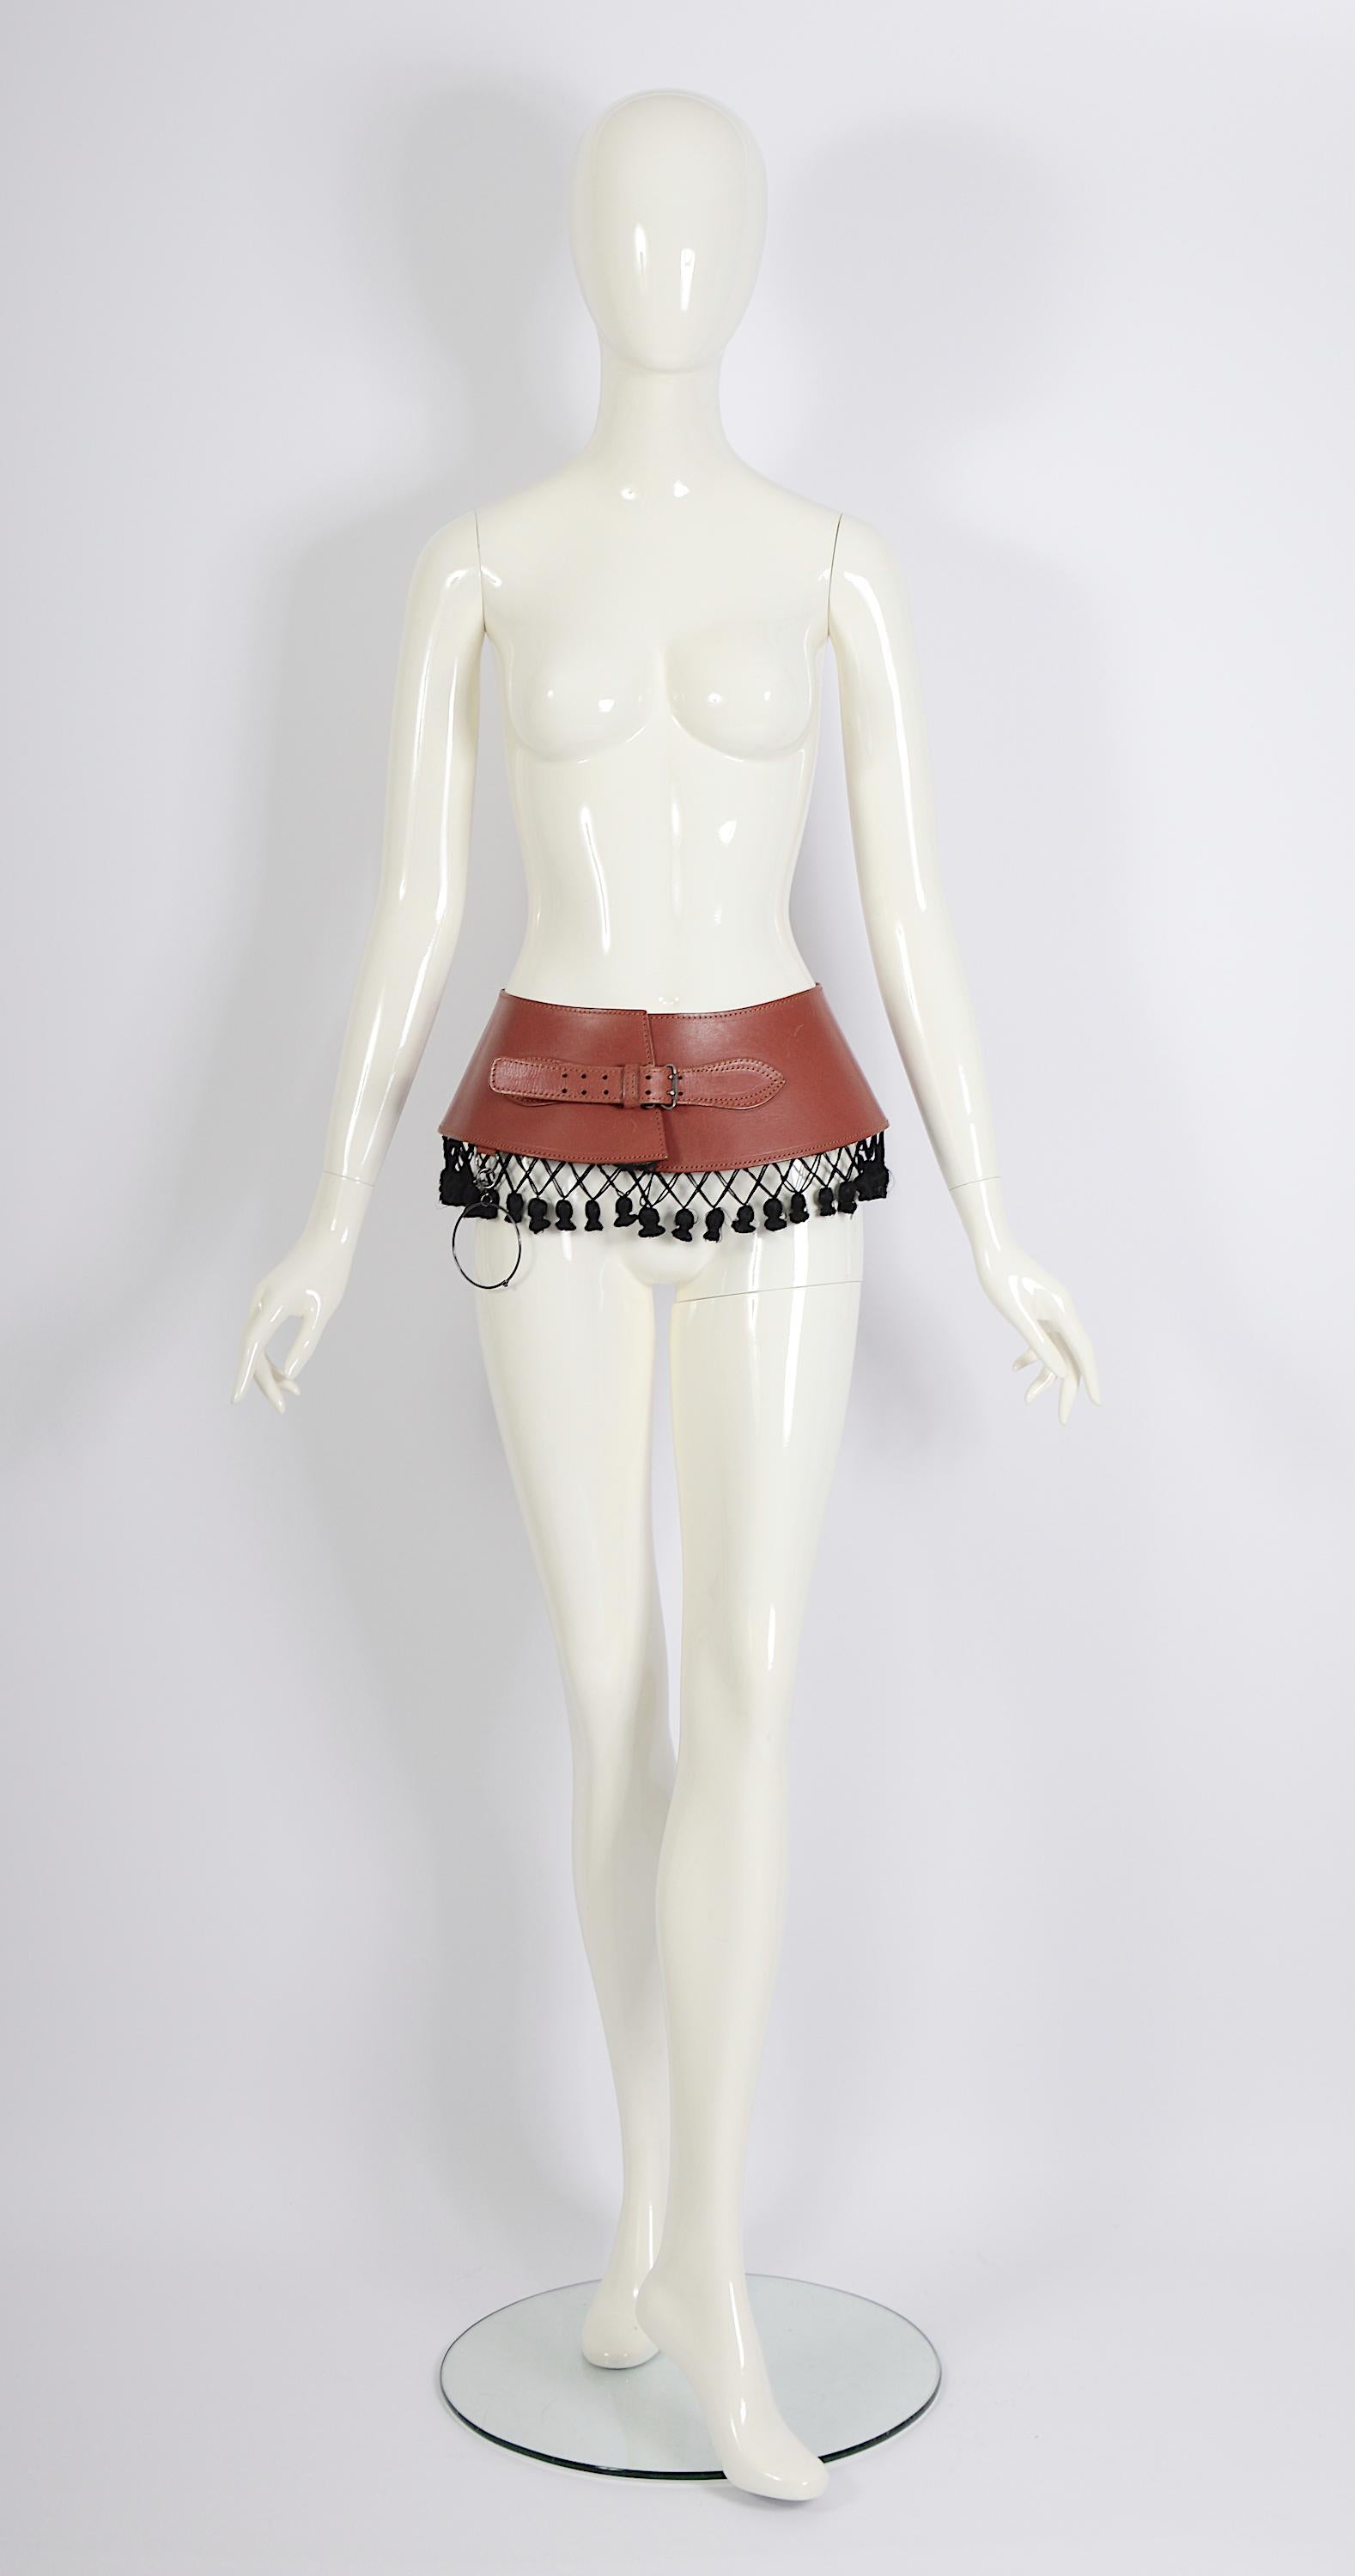 Jean Paul Gaultier by Gibo 1980s tassel embellished wide brown leather belt In Excellent Condition For Sale In Antwerp, BE